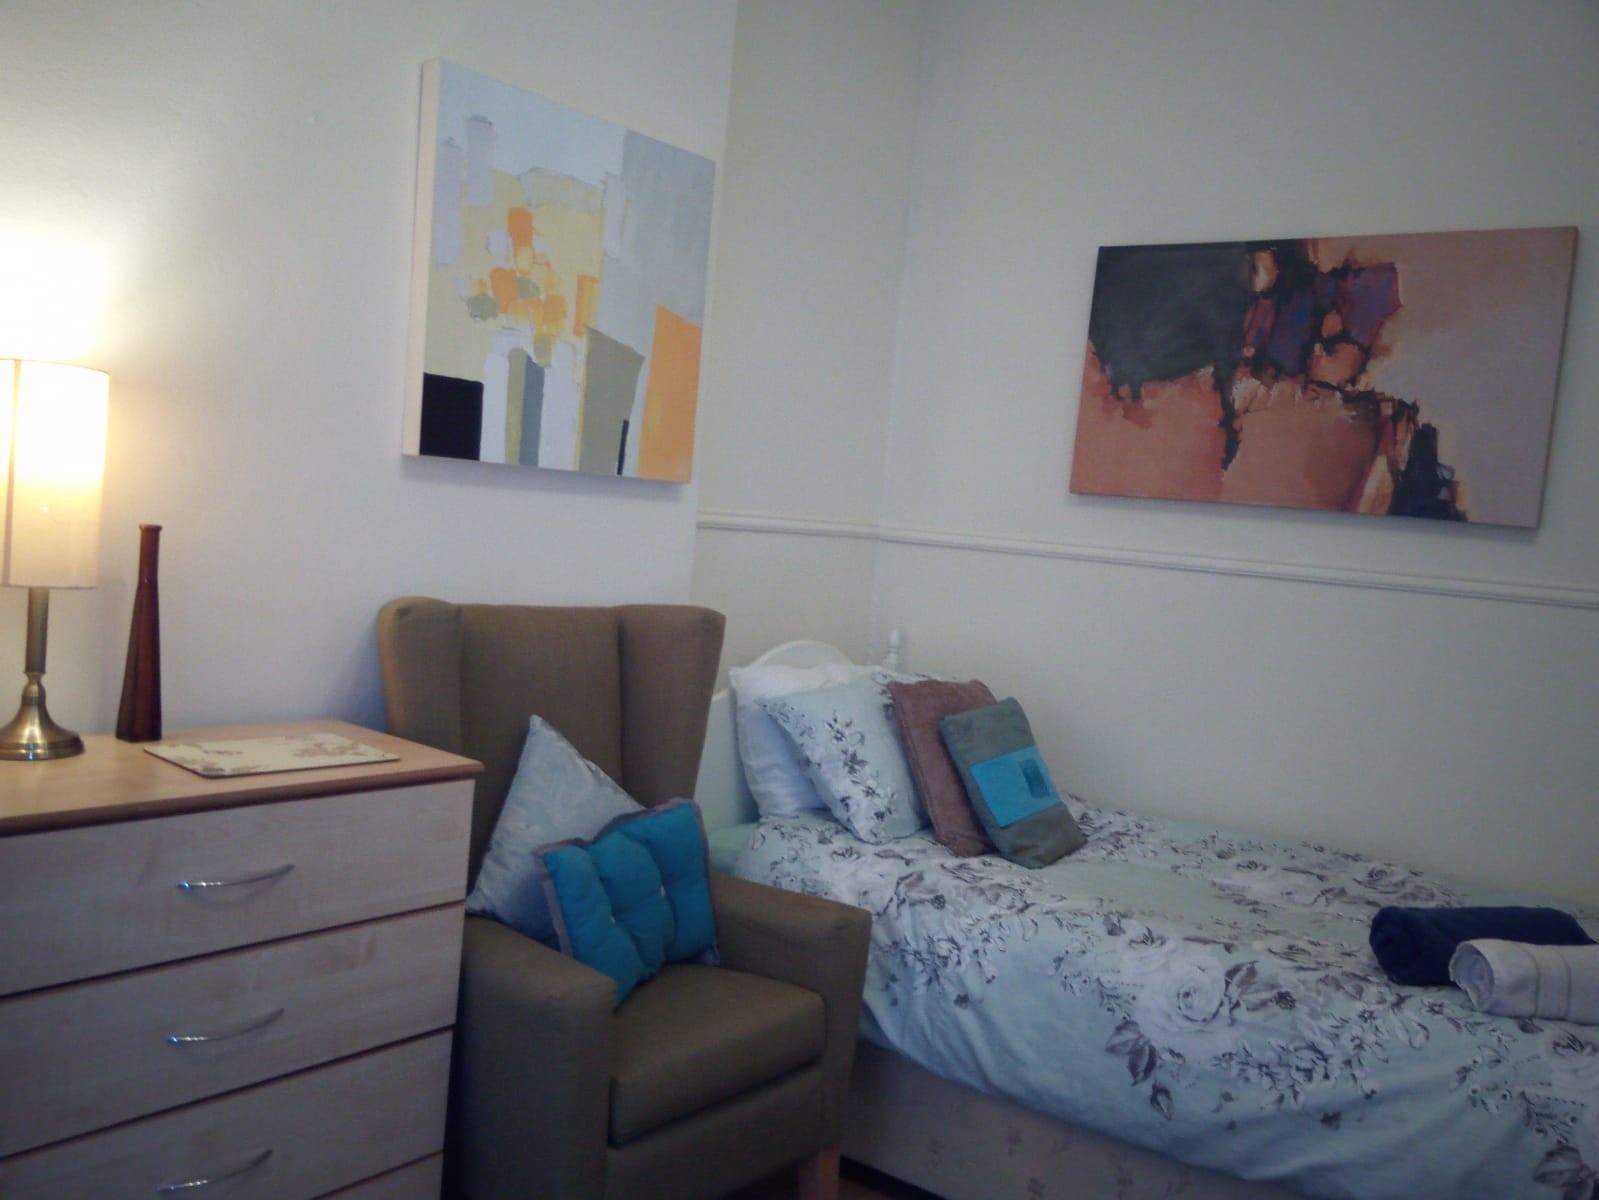 3 Bed Modern Flat With Living Room Broadband Included Electricity And Gas Partly Included Close To Aberdeen Uni And City